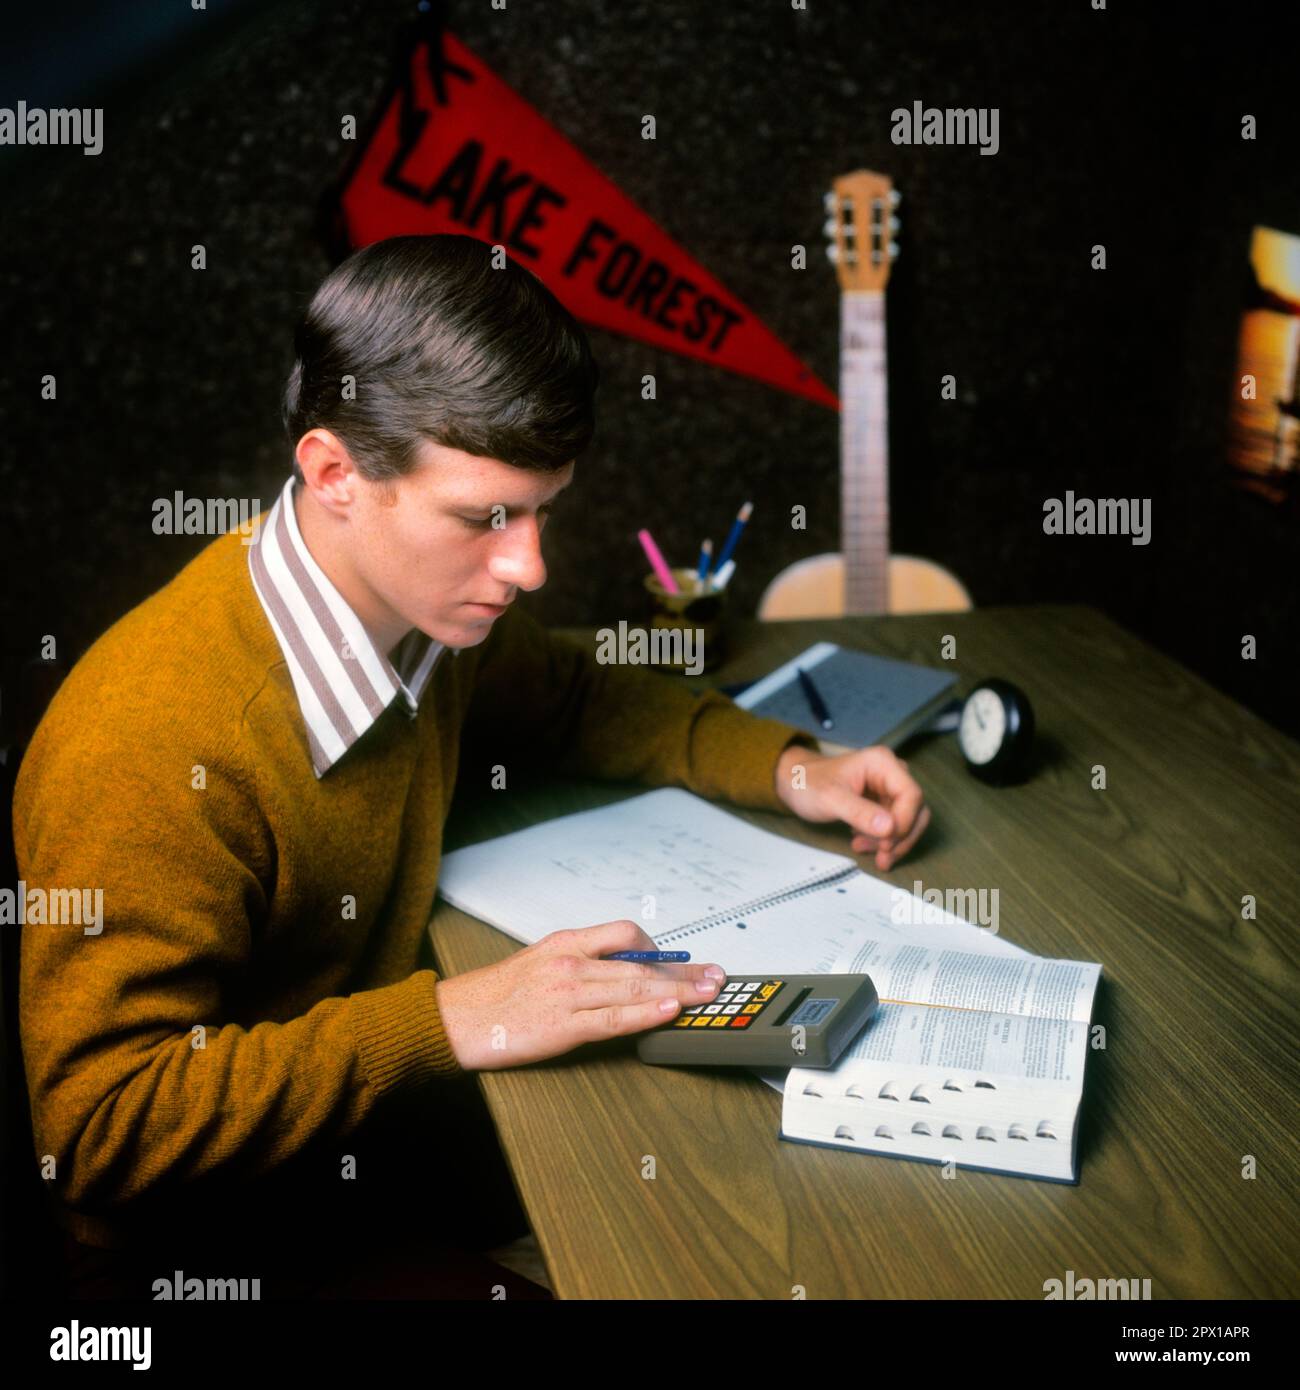 1970s MALE COLLEGE STUDENT STUDYING AT DESK USING REFERENCE BOOK CALCULATOR TAKING NOTES DORM ROOM GUITAR PENNANT IN BACKGROUND - ks14368 BAN001 HARS INFORMATION LIFESTYLE HOME LIFE COPY SPACE HALF-LENGTH PERSONS THOUGHTFUL MALES TEENAGE BOY DORM GOALS SCHOOLS REFERENCE UNIVERSITIES HIGH SCHOOL PENNANT USING HIGH SCHOOLS HIGHER EDUCATION TEENAGED COLLEGES SOLEMN FOCUSED GROWTH INTENSE JUVENILES YOUNG ADULT MAN CAREFUL CAUCASIAN ETHNICITY EARNEST INTENT OLD FASHIONED Stock Photo